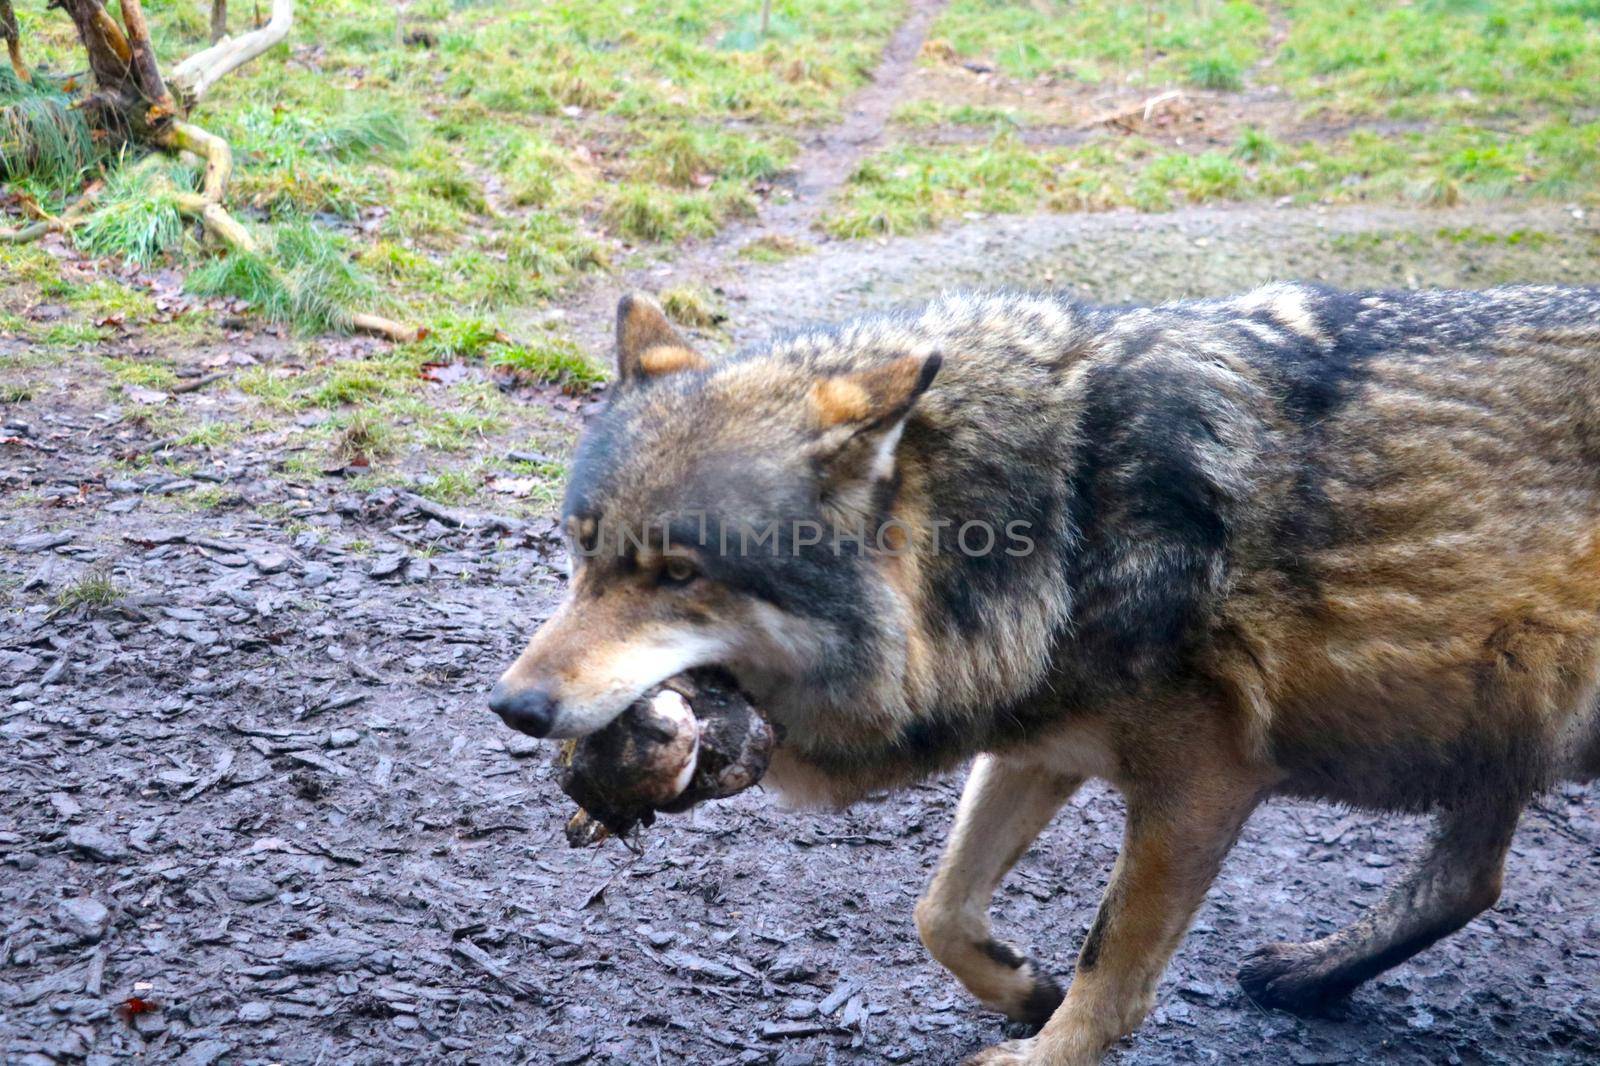 Out of focus, blurry background, wolf in mouth holding bone. by kip02kas